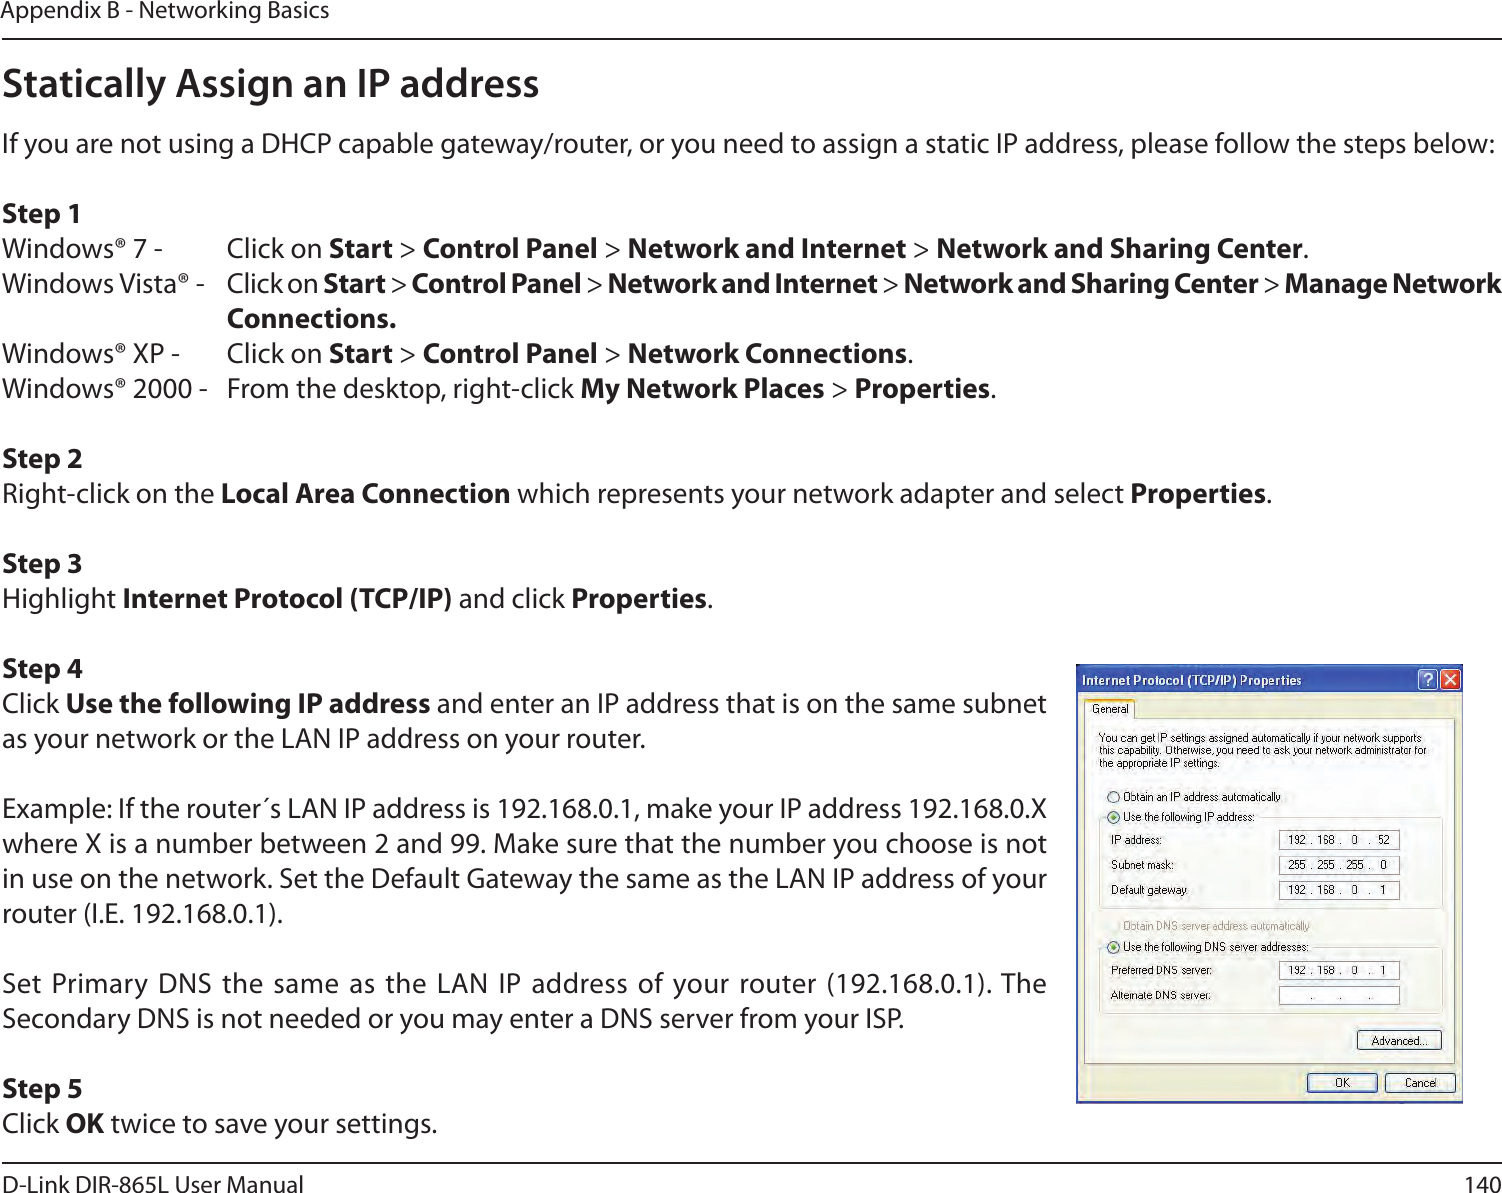 140D-Link DIR-865L User ManualAppendix B - Networking BasicsStatically Assign an IP addressIf you are not using a DHCP capable gateway/router, or you need to assign a static IP address, please follow the steps below:Step 1Windows® 7 -  Click on Start &gt; Control Panel &gt; Network and Internet &gt; Network and Sharing Center.Windows Vista® -  Click on Start &gt; Control Panel &gt; Network and Internet &gt; Network and Sharing Center &gt; Manage Network      Connections.Windows® XP -  Click on Start &gt; Control Panel &gt; Network Connections.Windows® 2000 -  From the desktop, right-click My Network Places &gt; Properties.Step 2Right-click on the Local Area Connection which represents your network adapter and select Properties.Step 3Highlight Internet Protocol (TCP/IP) and click Properties.Step 4Click Use the following IP address and enter an IP address that is on the same subnet as your network or the LAN IP address on your router. Example: If the router´s LAN IP address is 192.168.0.1, make your IP address 192.168.0.X where X is a number between 2 and 99. Make sure that the number you choose is not in use on the network. Set the Default Gateway the same as the LAN IP address of your router (I.E. 192.168.0.1). Set Primary DNS the  same as the LAN  IP address of your router (192.168.0.1). The Secondary DNS is not needed or you may enter a DNS server from your ISP.Step 5Click OK twice to save your settings.